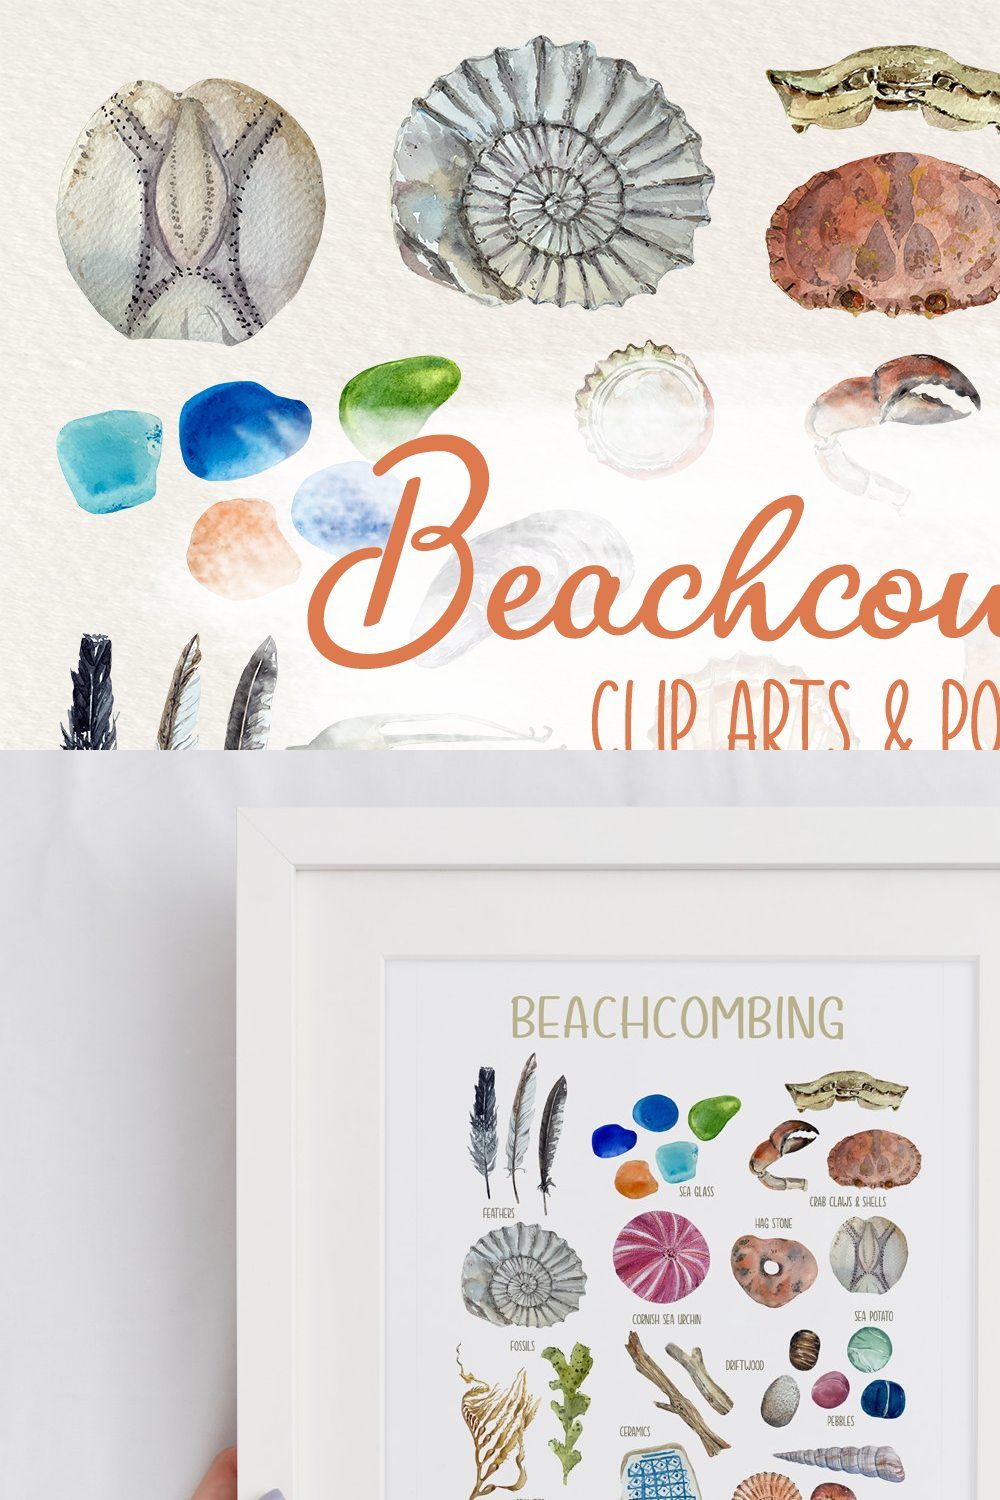 Beachcombing Clip Arts and Poster pinterest preview image.